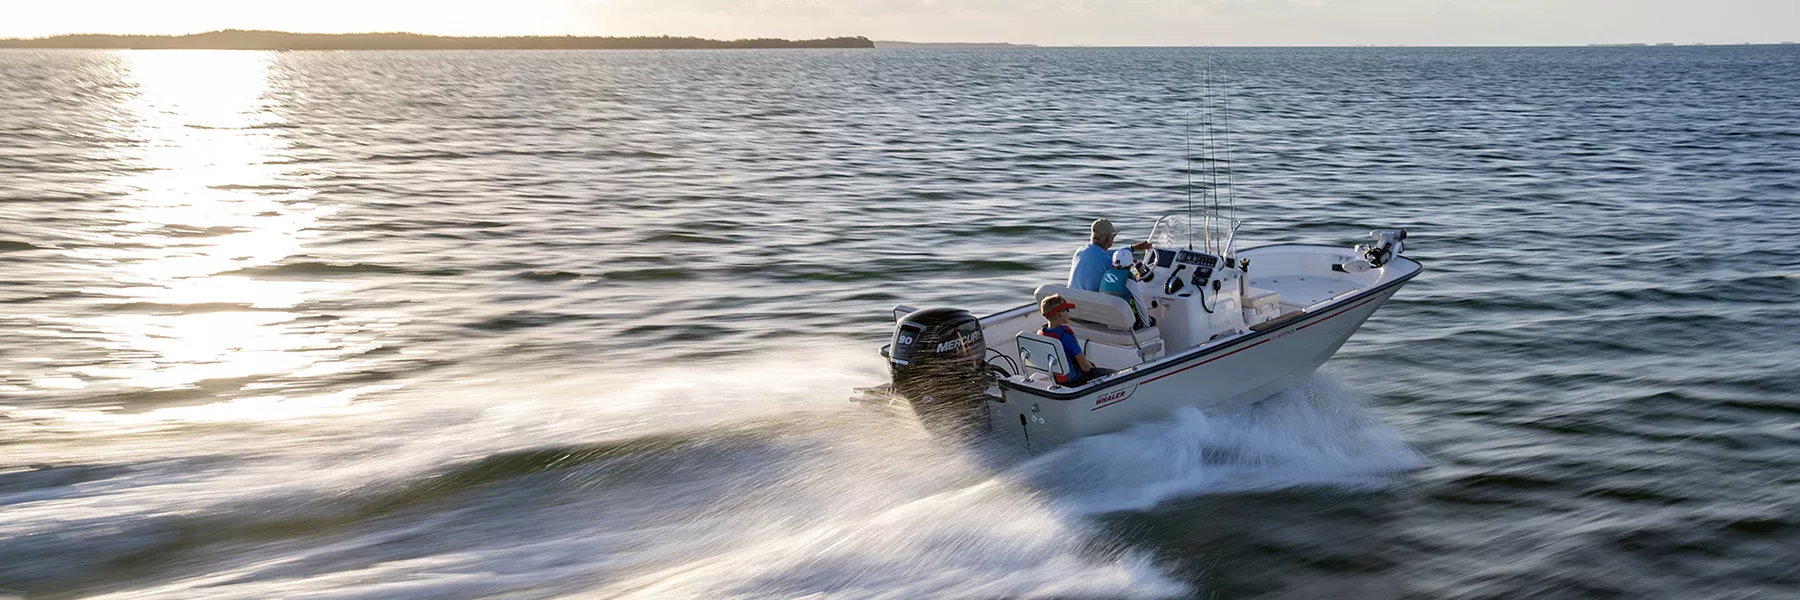 people riding a boston whaler on the ocean